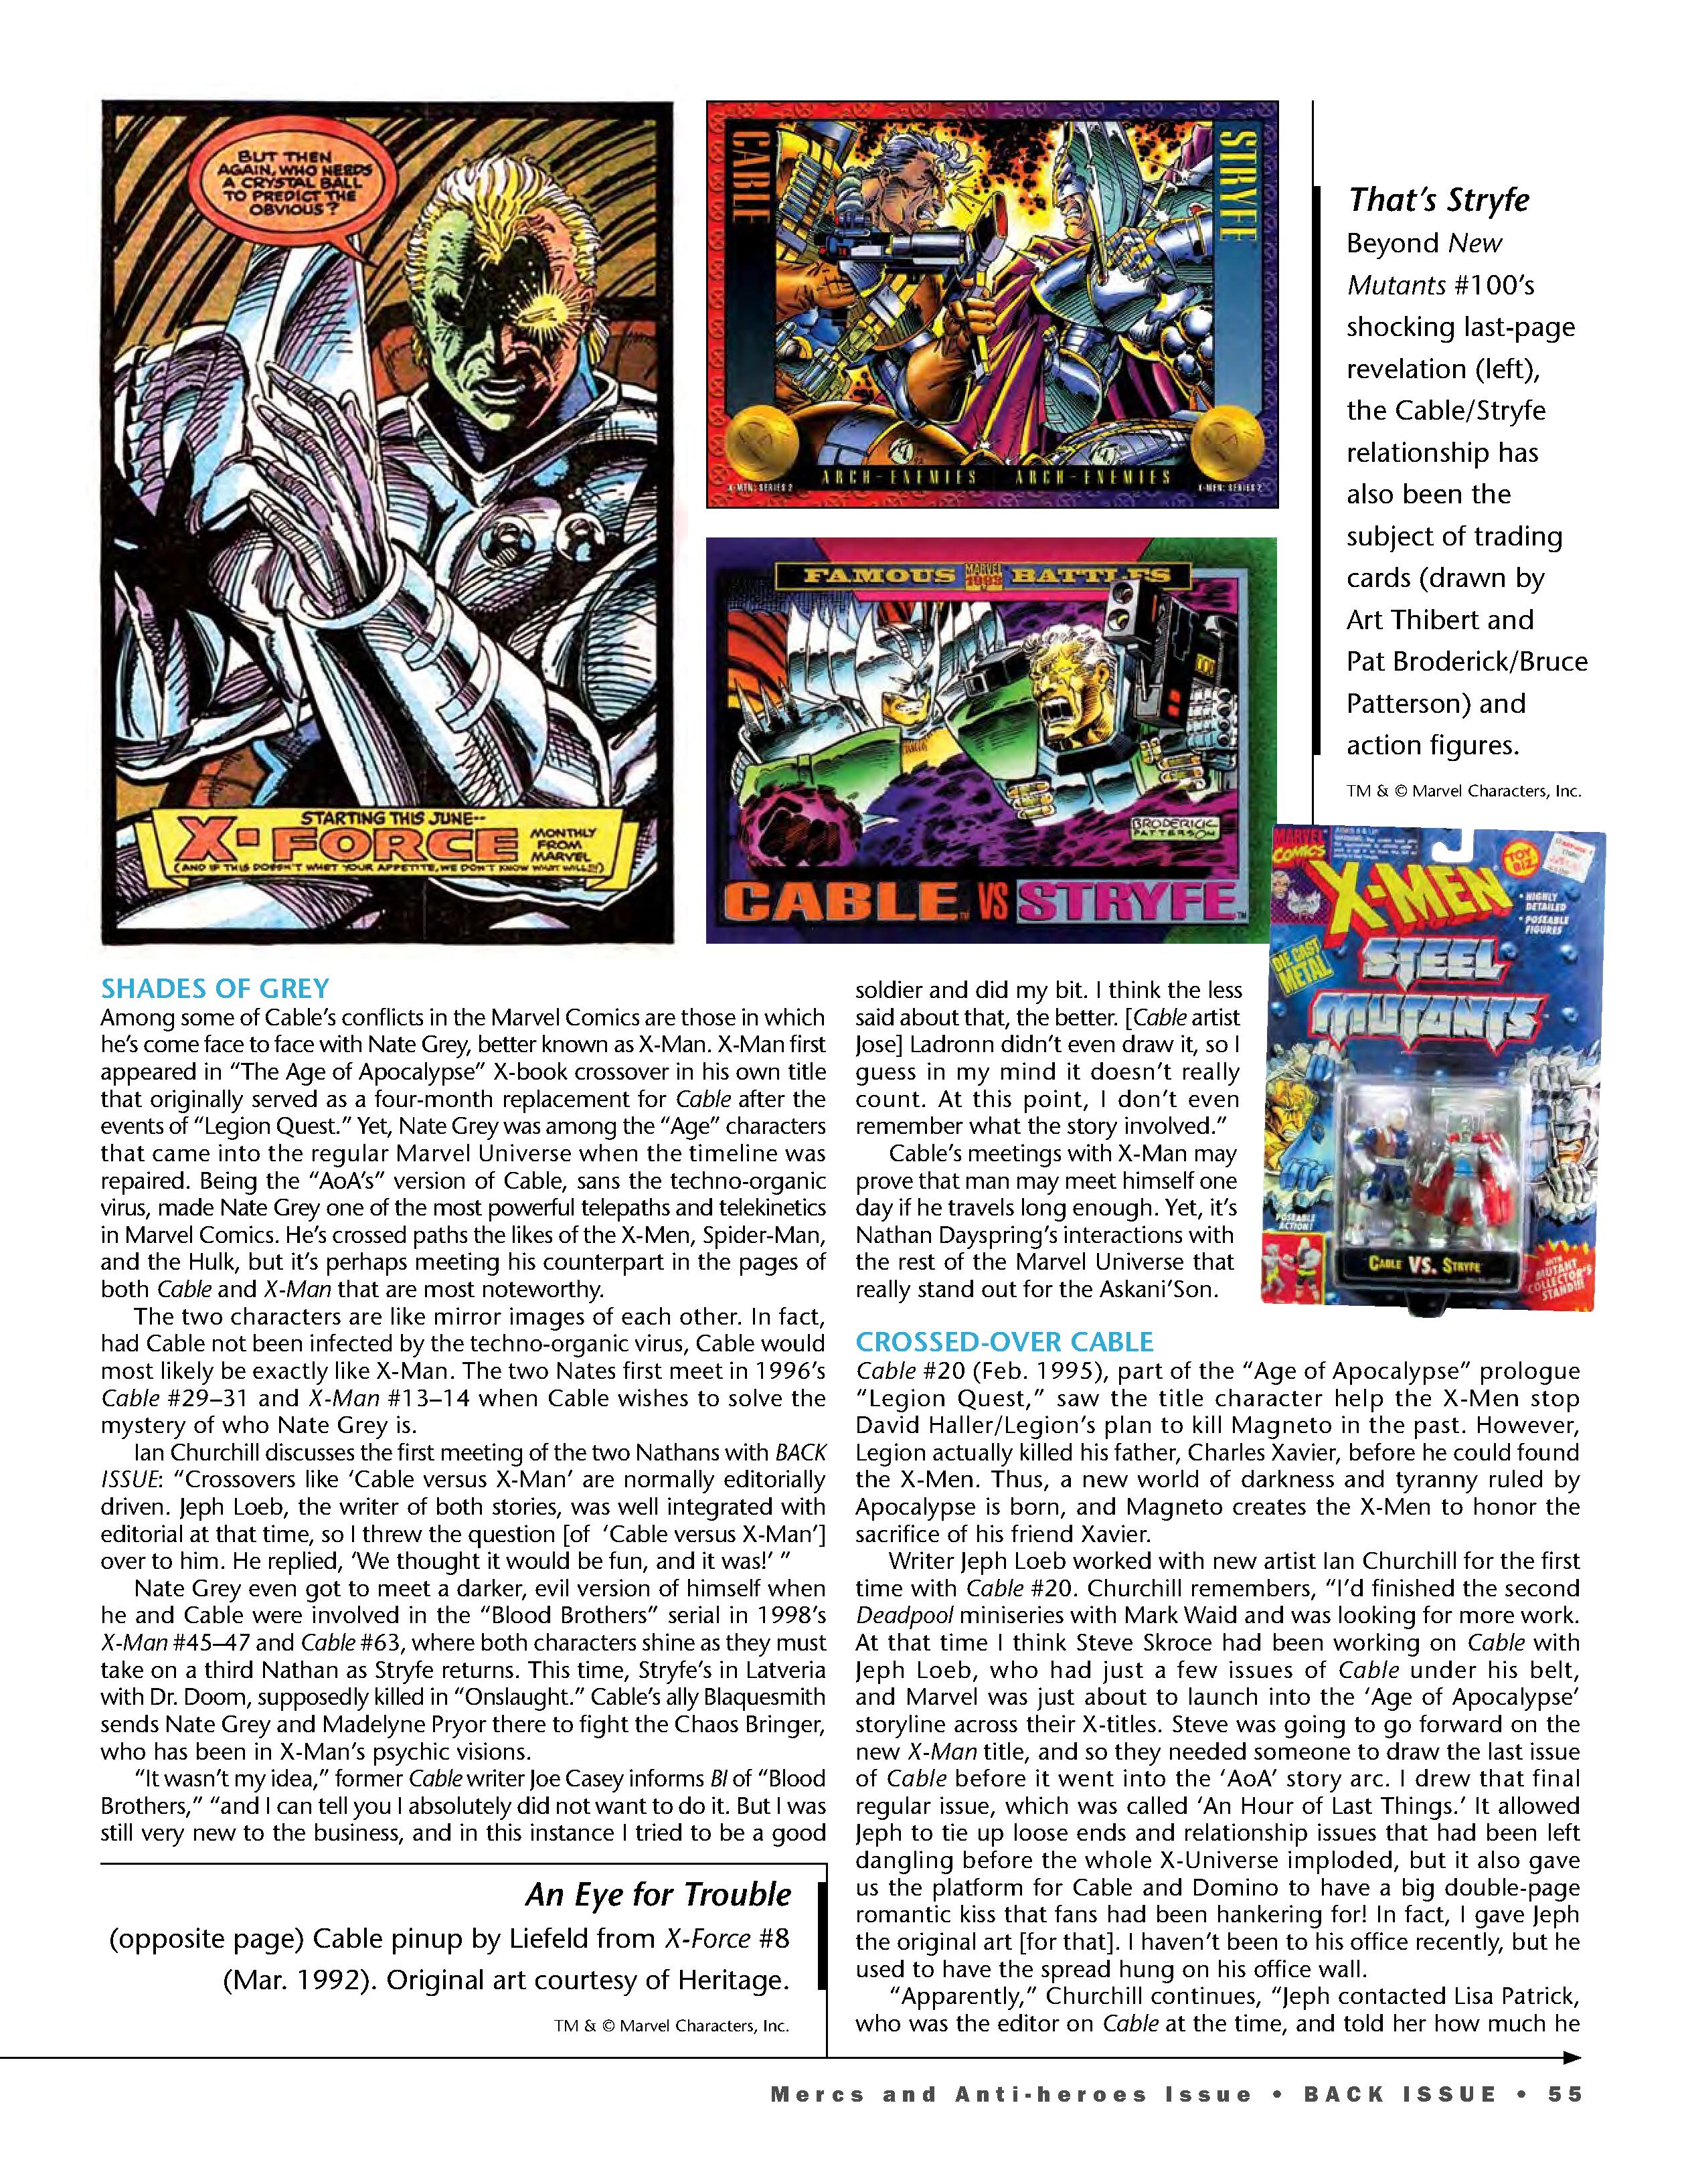 Read online Back Issue comic -  Issue #102 - 57